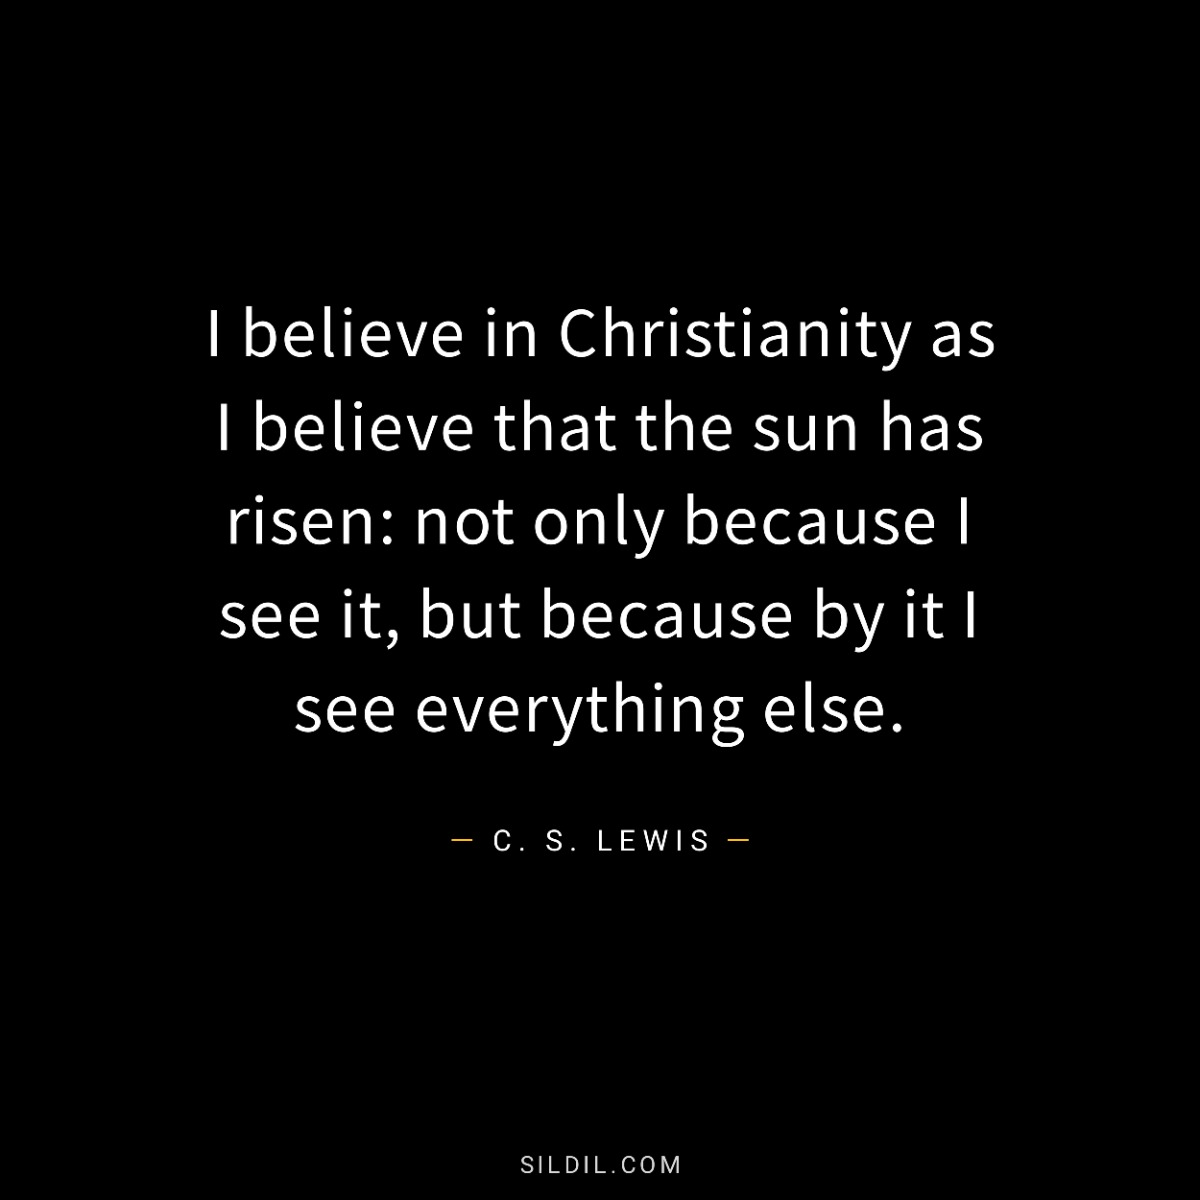 I believe in Christianity as I believe that the sun has risen: not only because I see it, but because by it I see everything else.